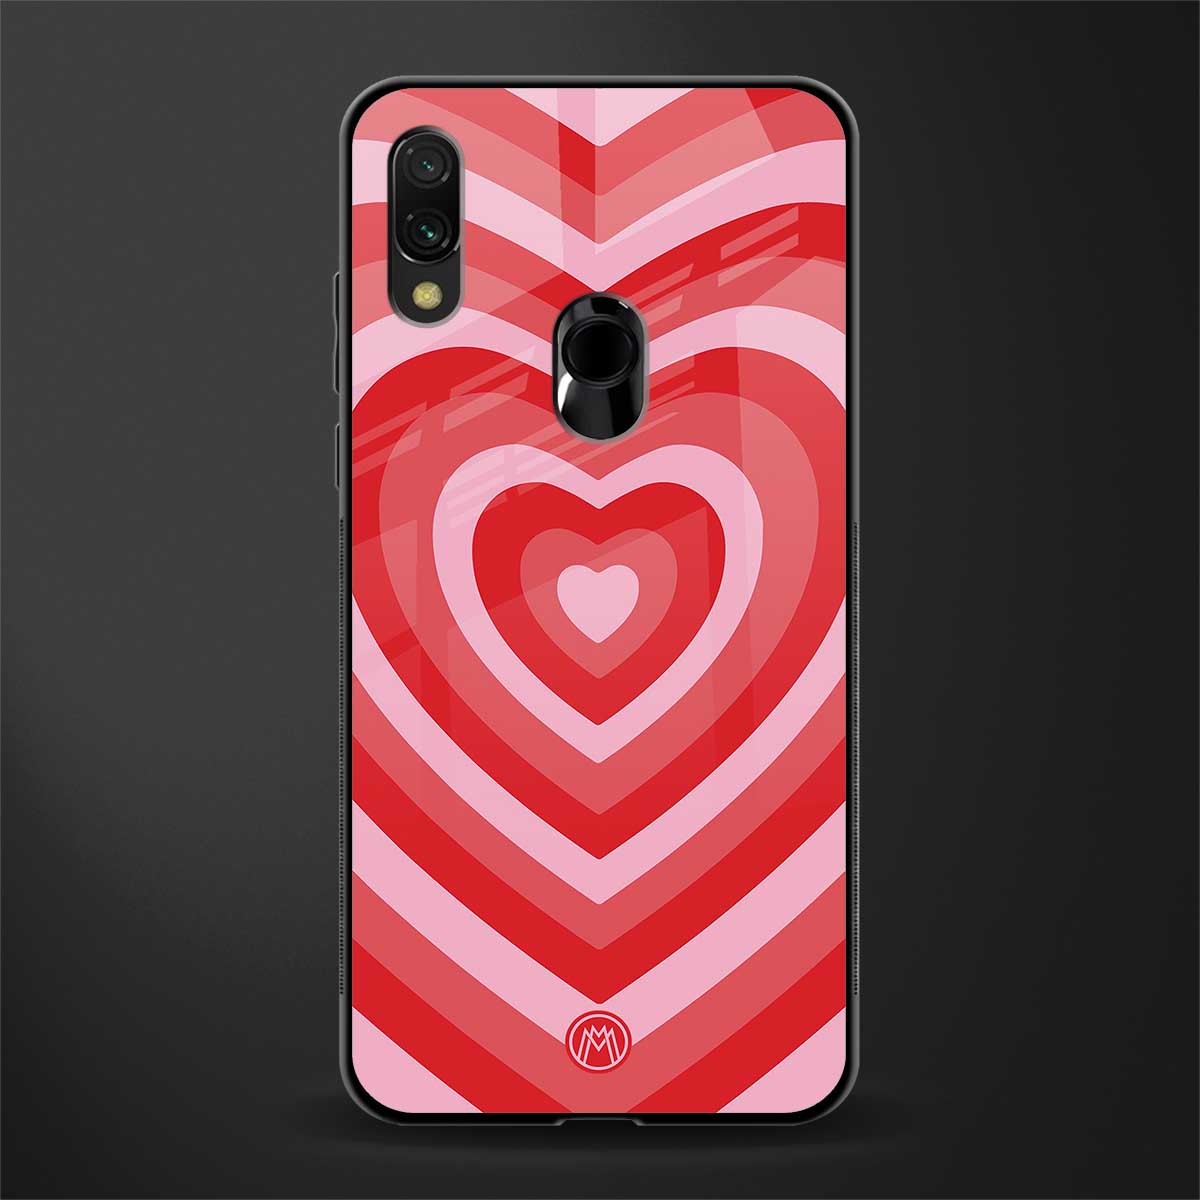 y2k red hearts aesthetic glass case for redmi note 7 pro image